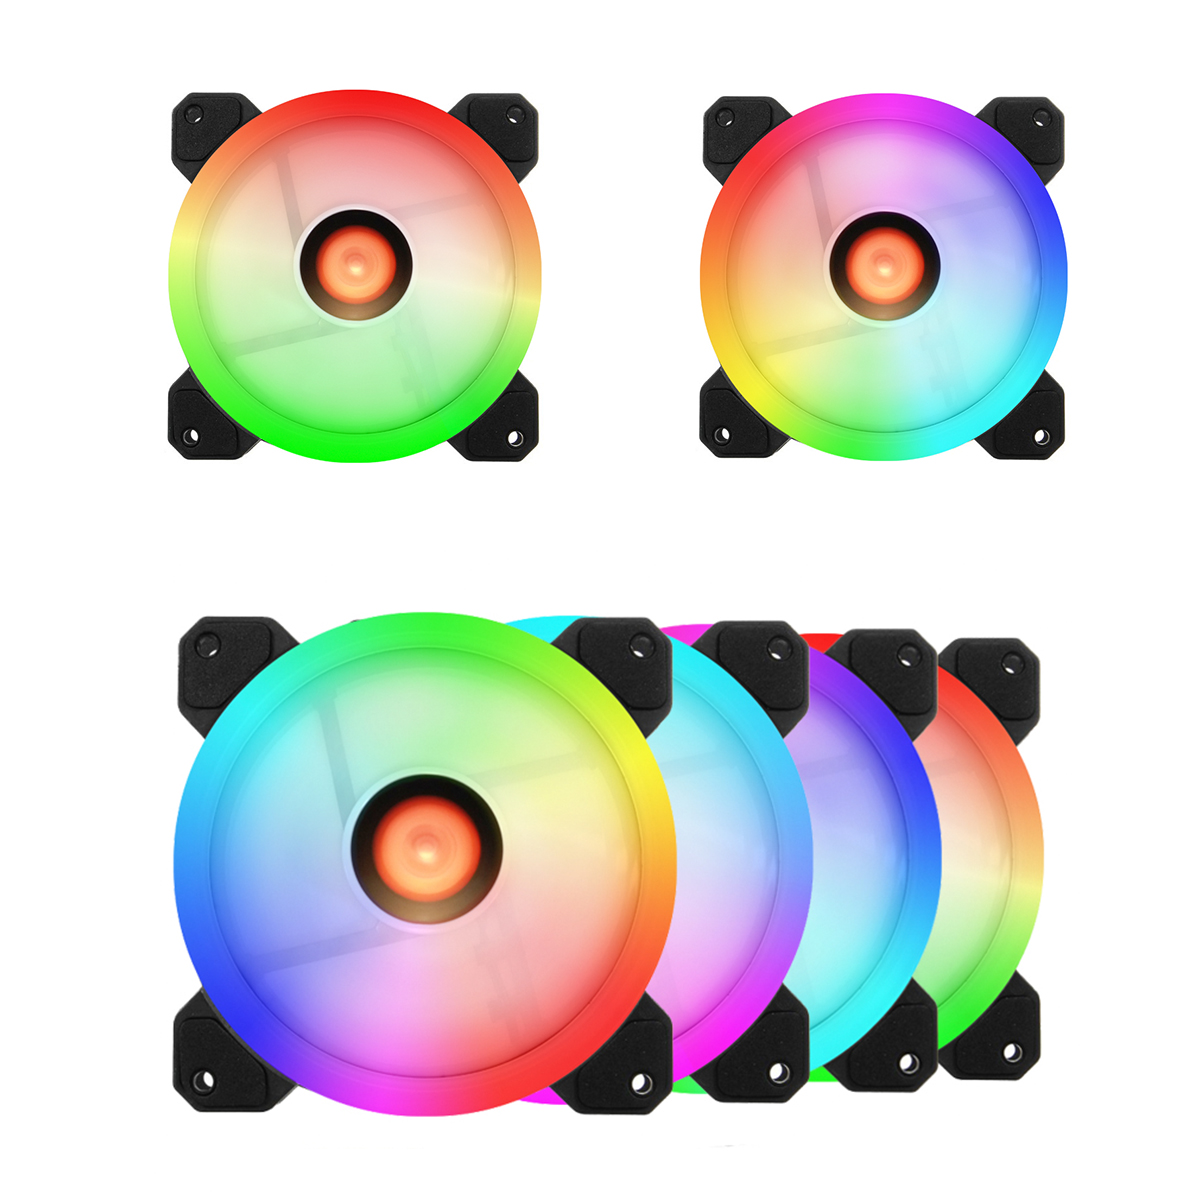 Find COOLMOON 120mm RGB Cooling Fan Small 6 Pin 4/5/6 Fans Silent CPU Heatsink Computer Case Cooler with Remote Controller for PC Computer F GM1 RGB for Sale on Gipsybee.com with cryptocurrencies